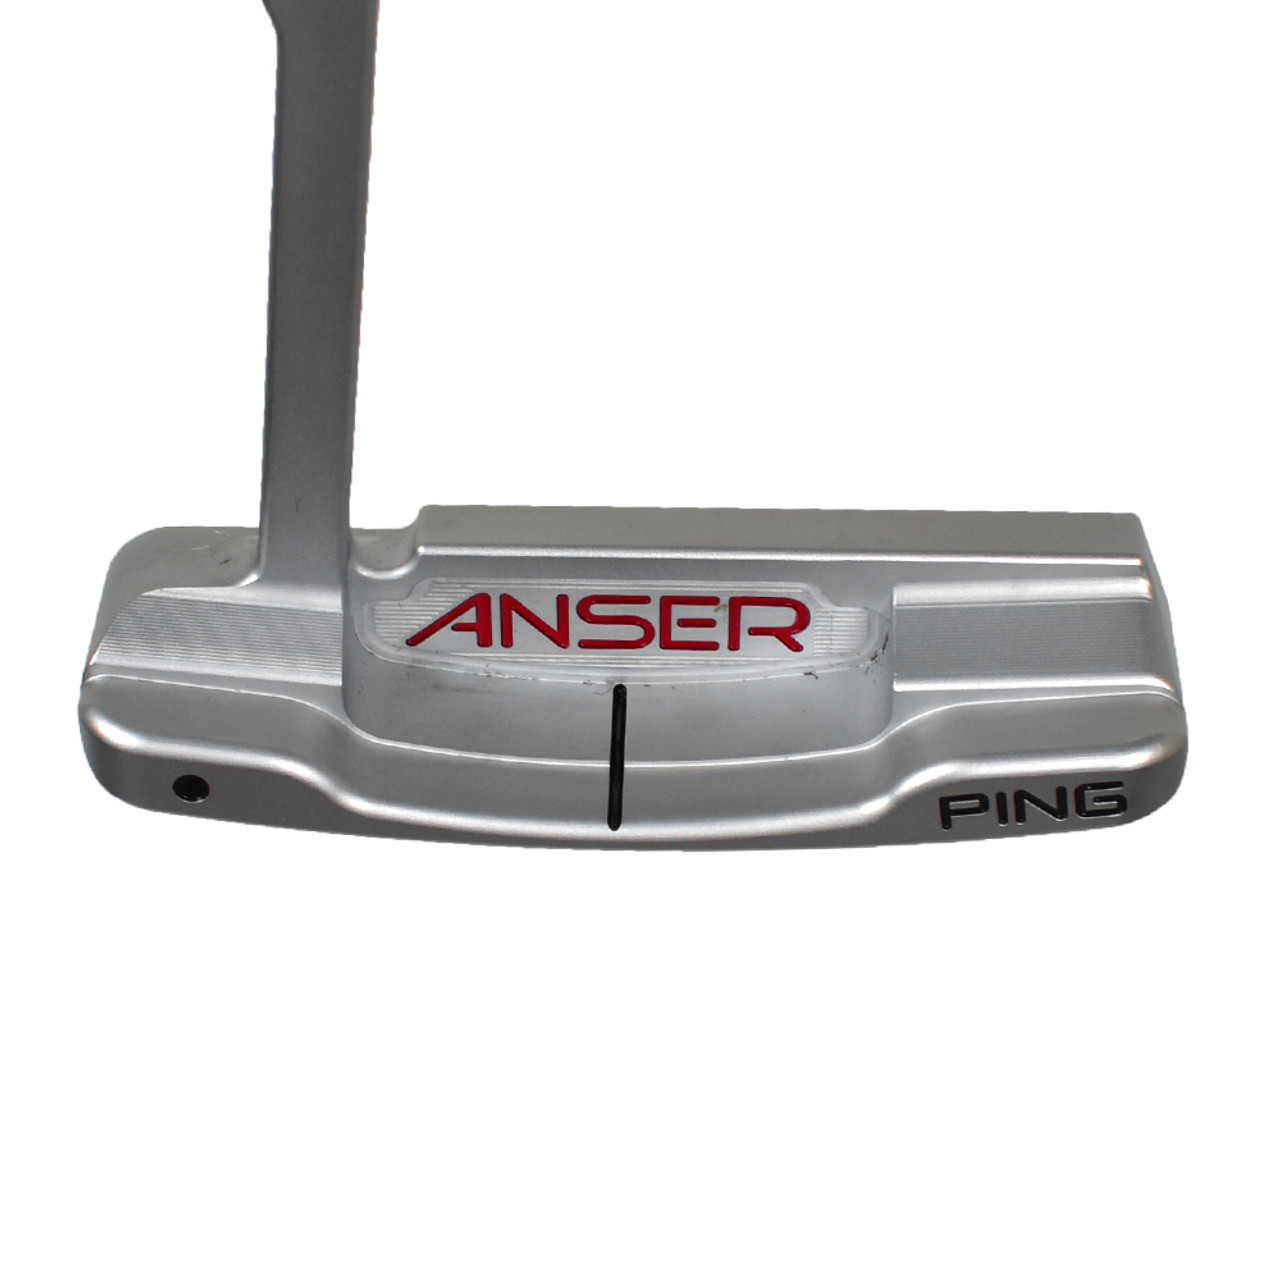 Pre-Owned Ping Golf Anser 5 Milled Putter | RockBottomGolf.com